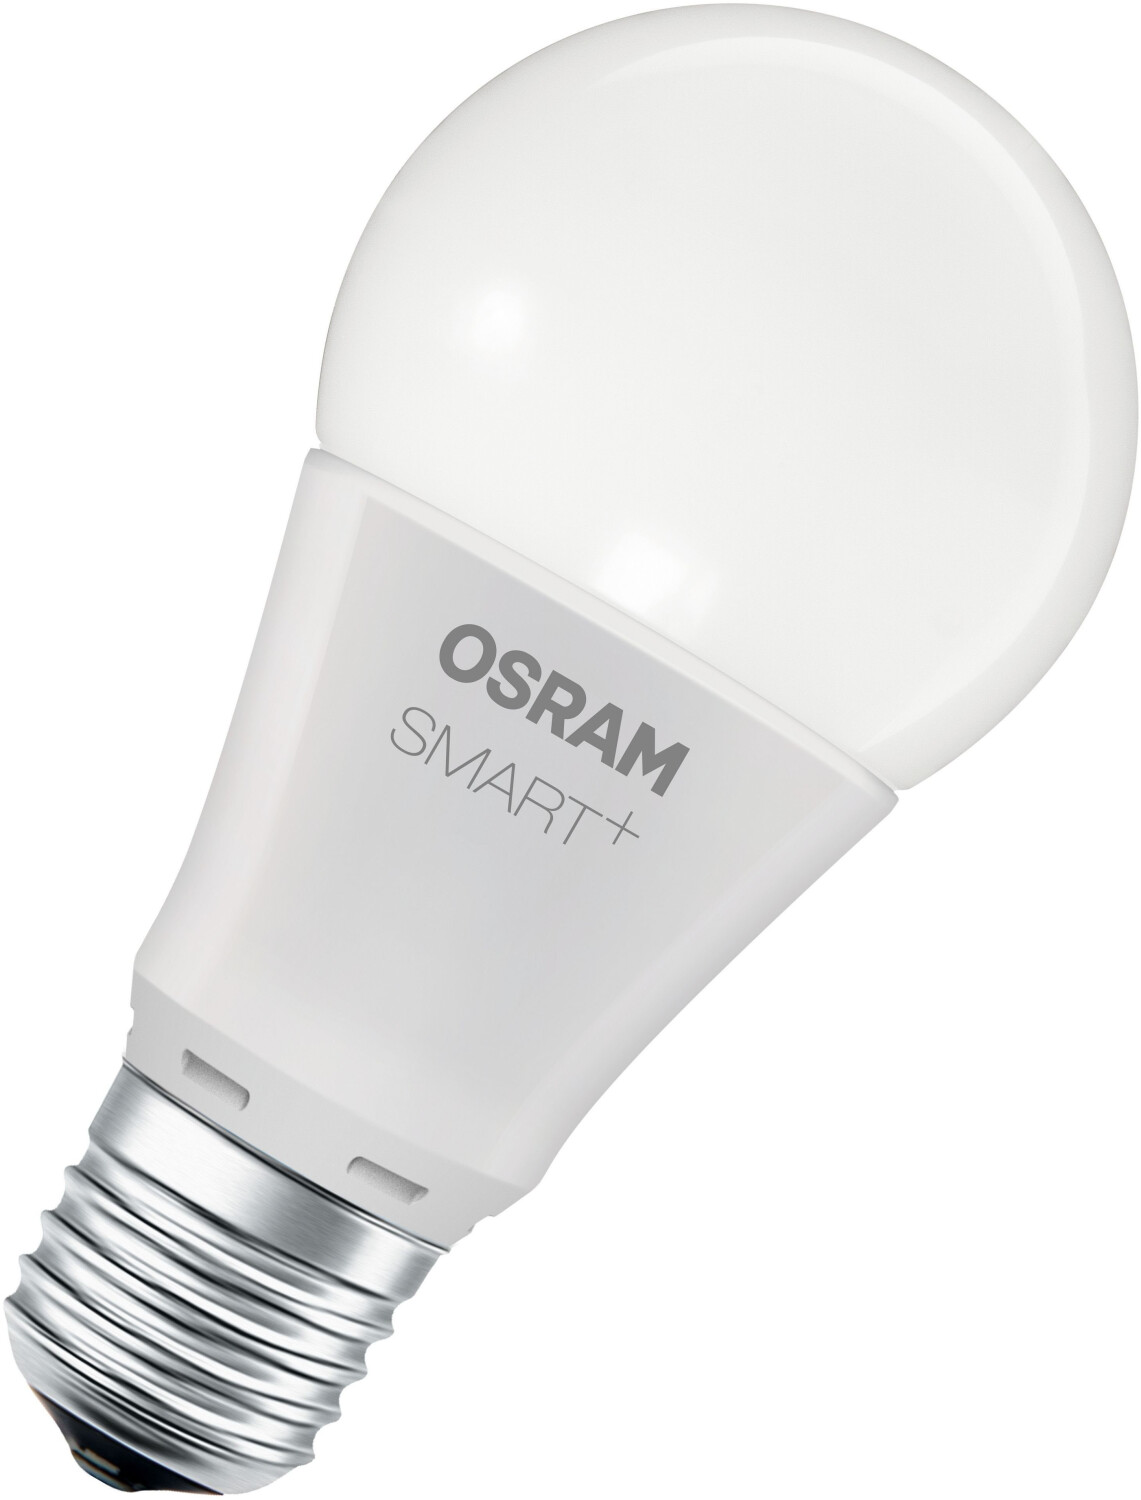 Buy Osram LED Smart+ tunable white 9W(60W) E27 (816534) from £9.99 ...